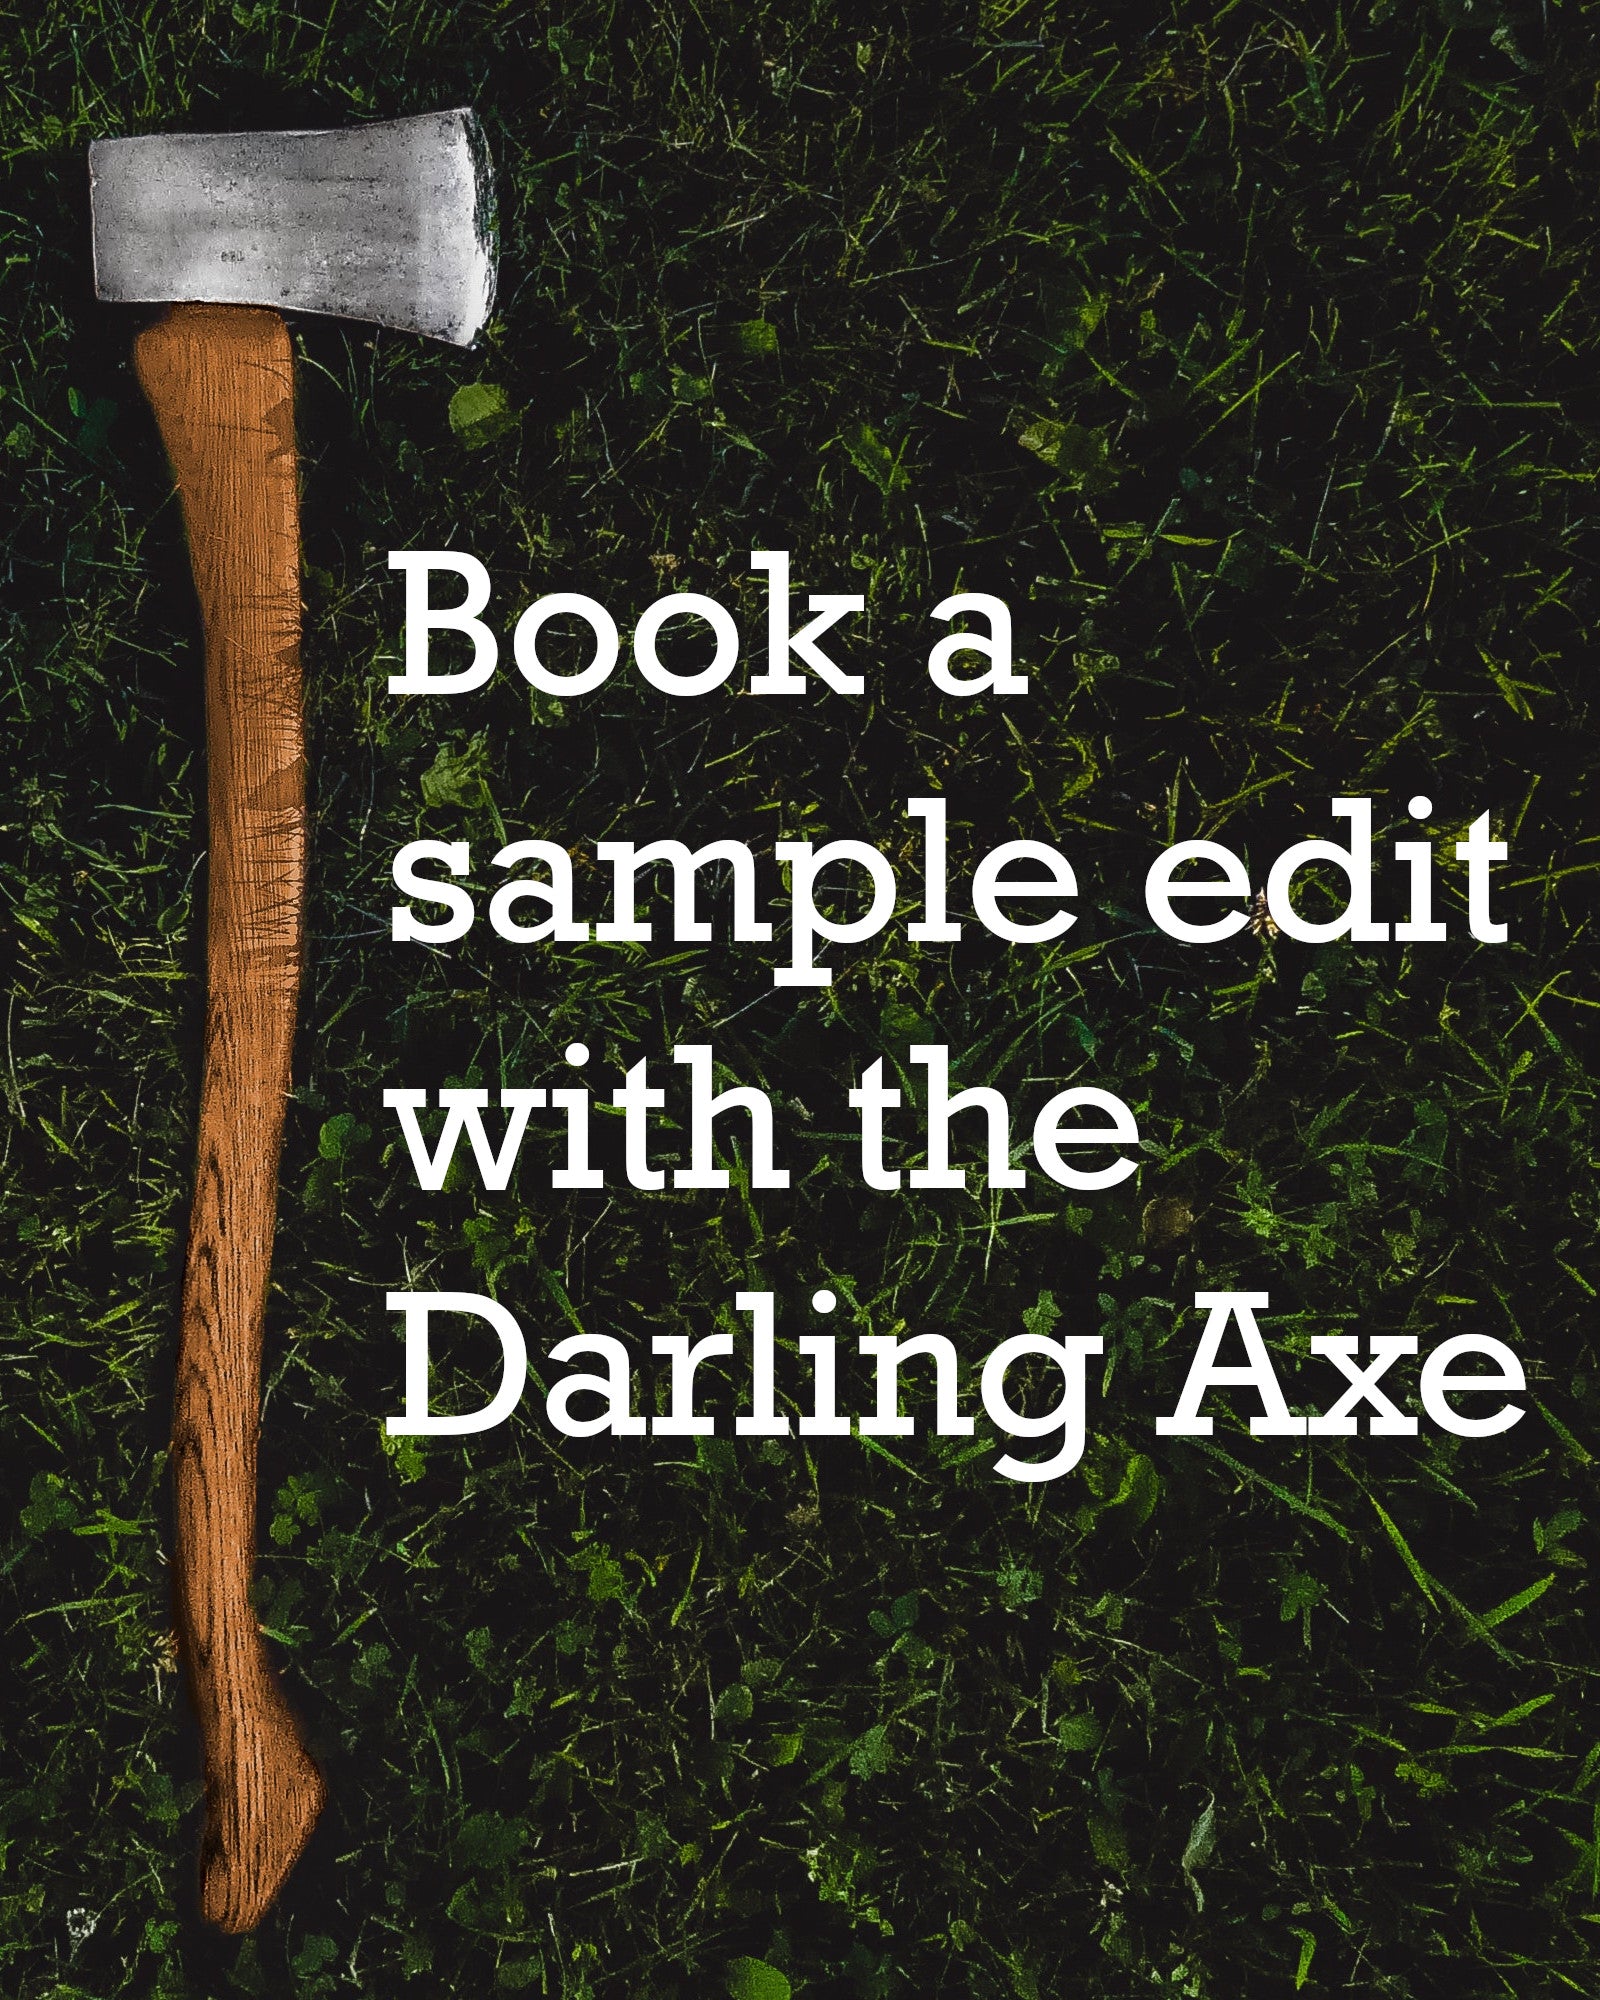 Book a sample edit with a professional fiction editor from the Darling Axe: manuscript development and book editing services